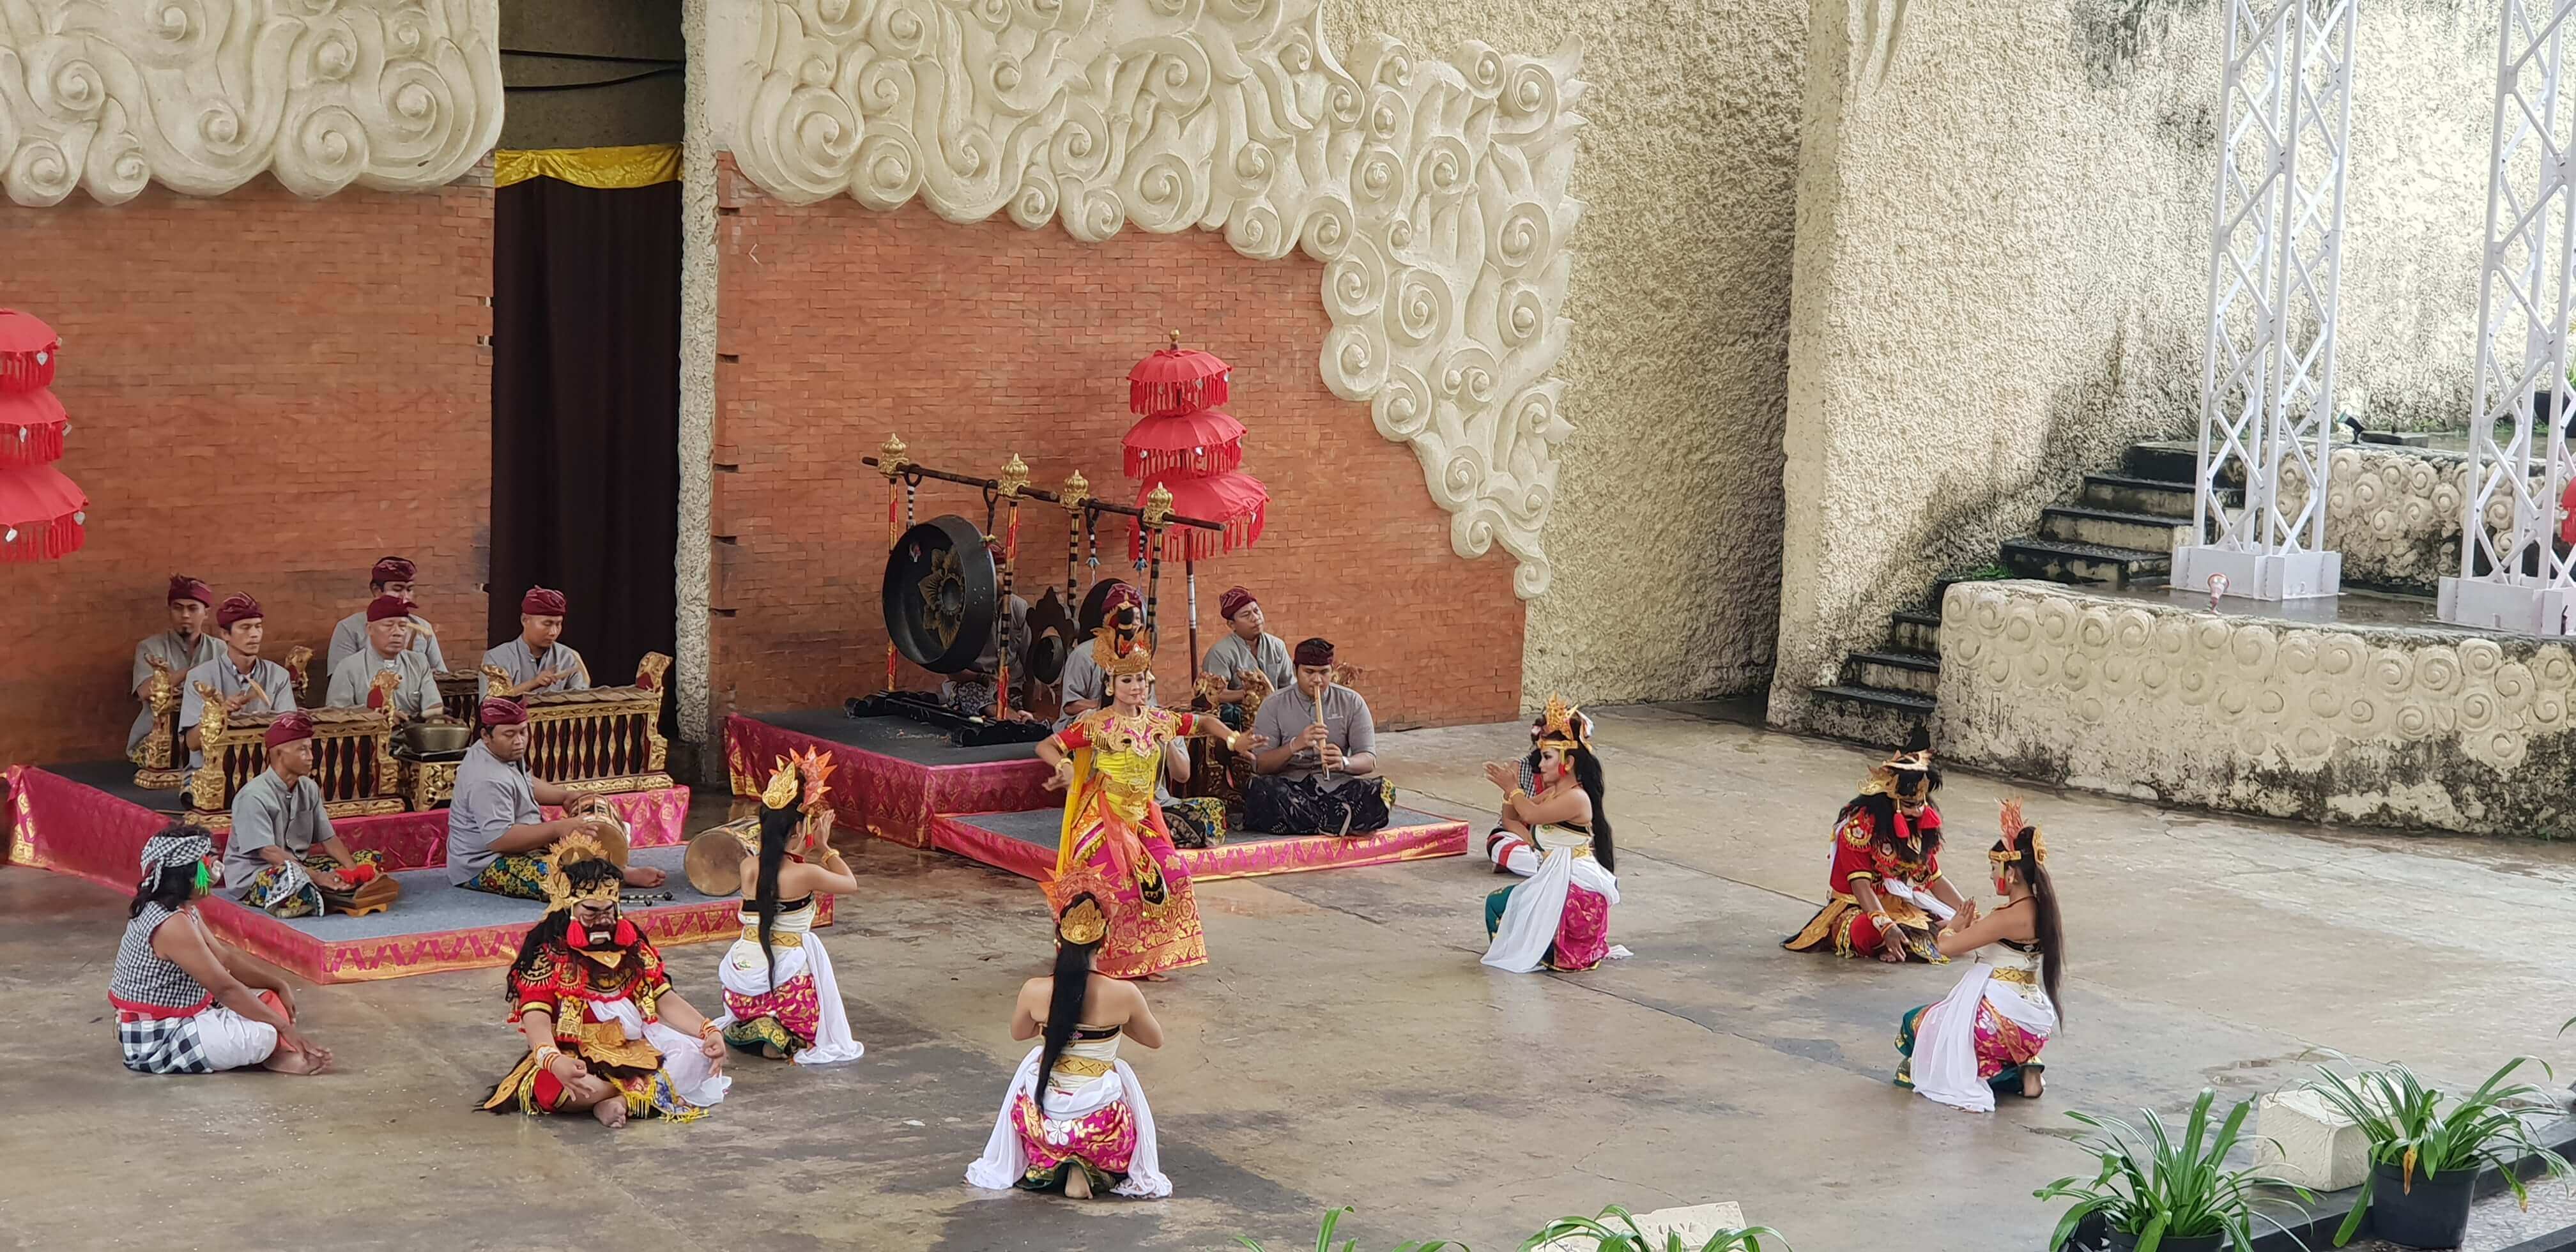 Balinese cultural show staged at the Amphitheatre